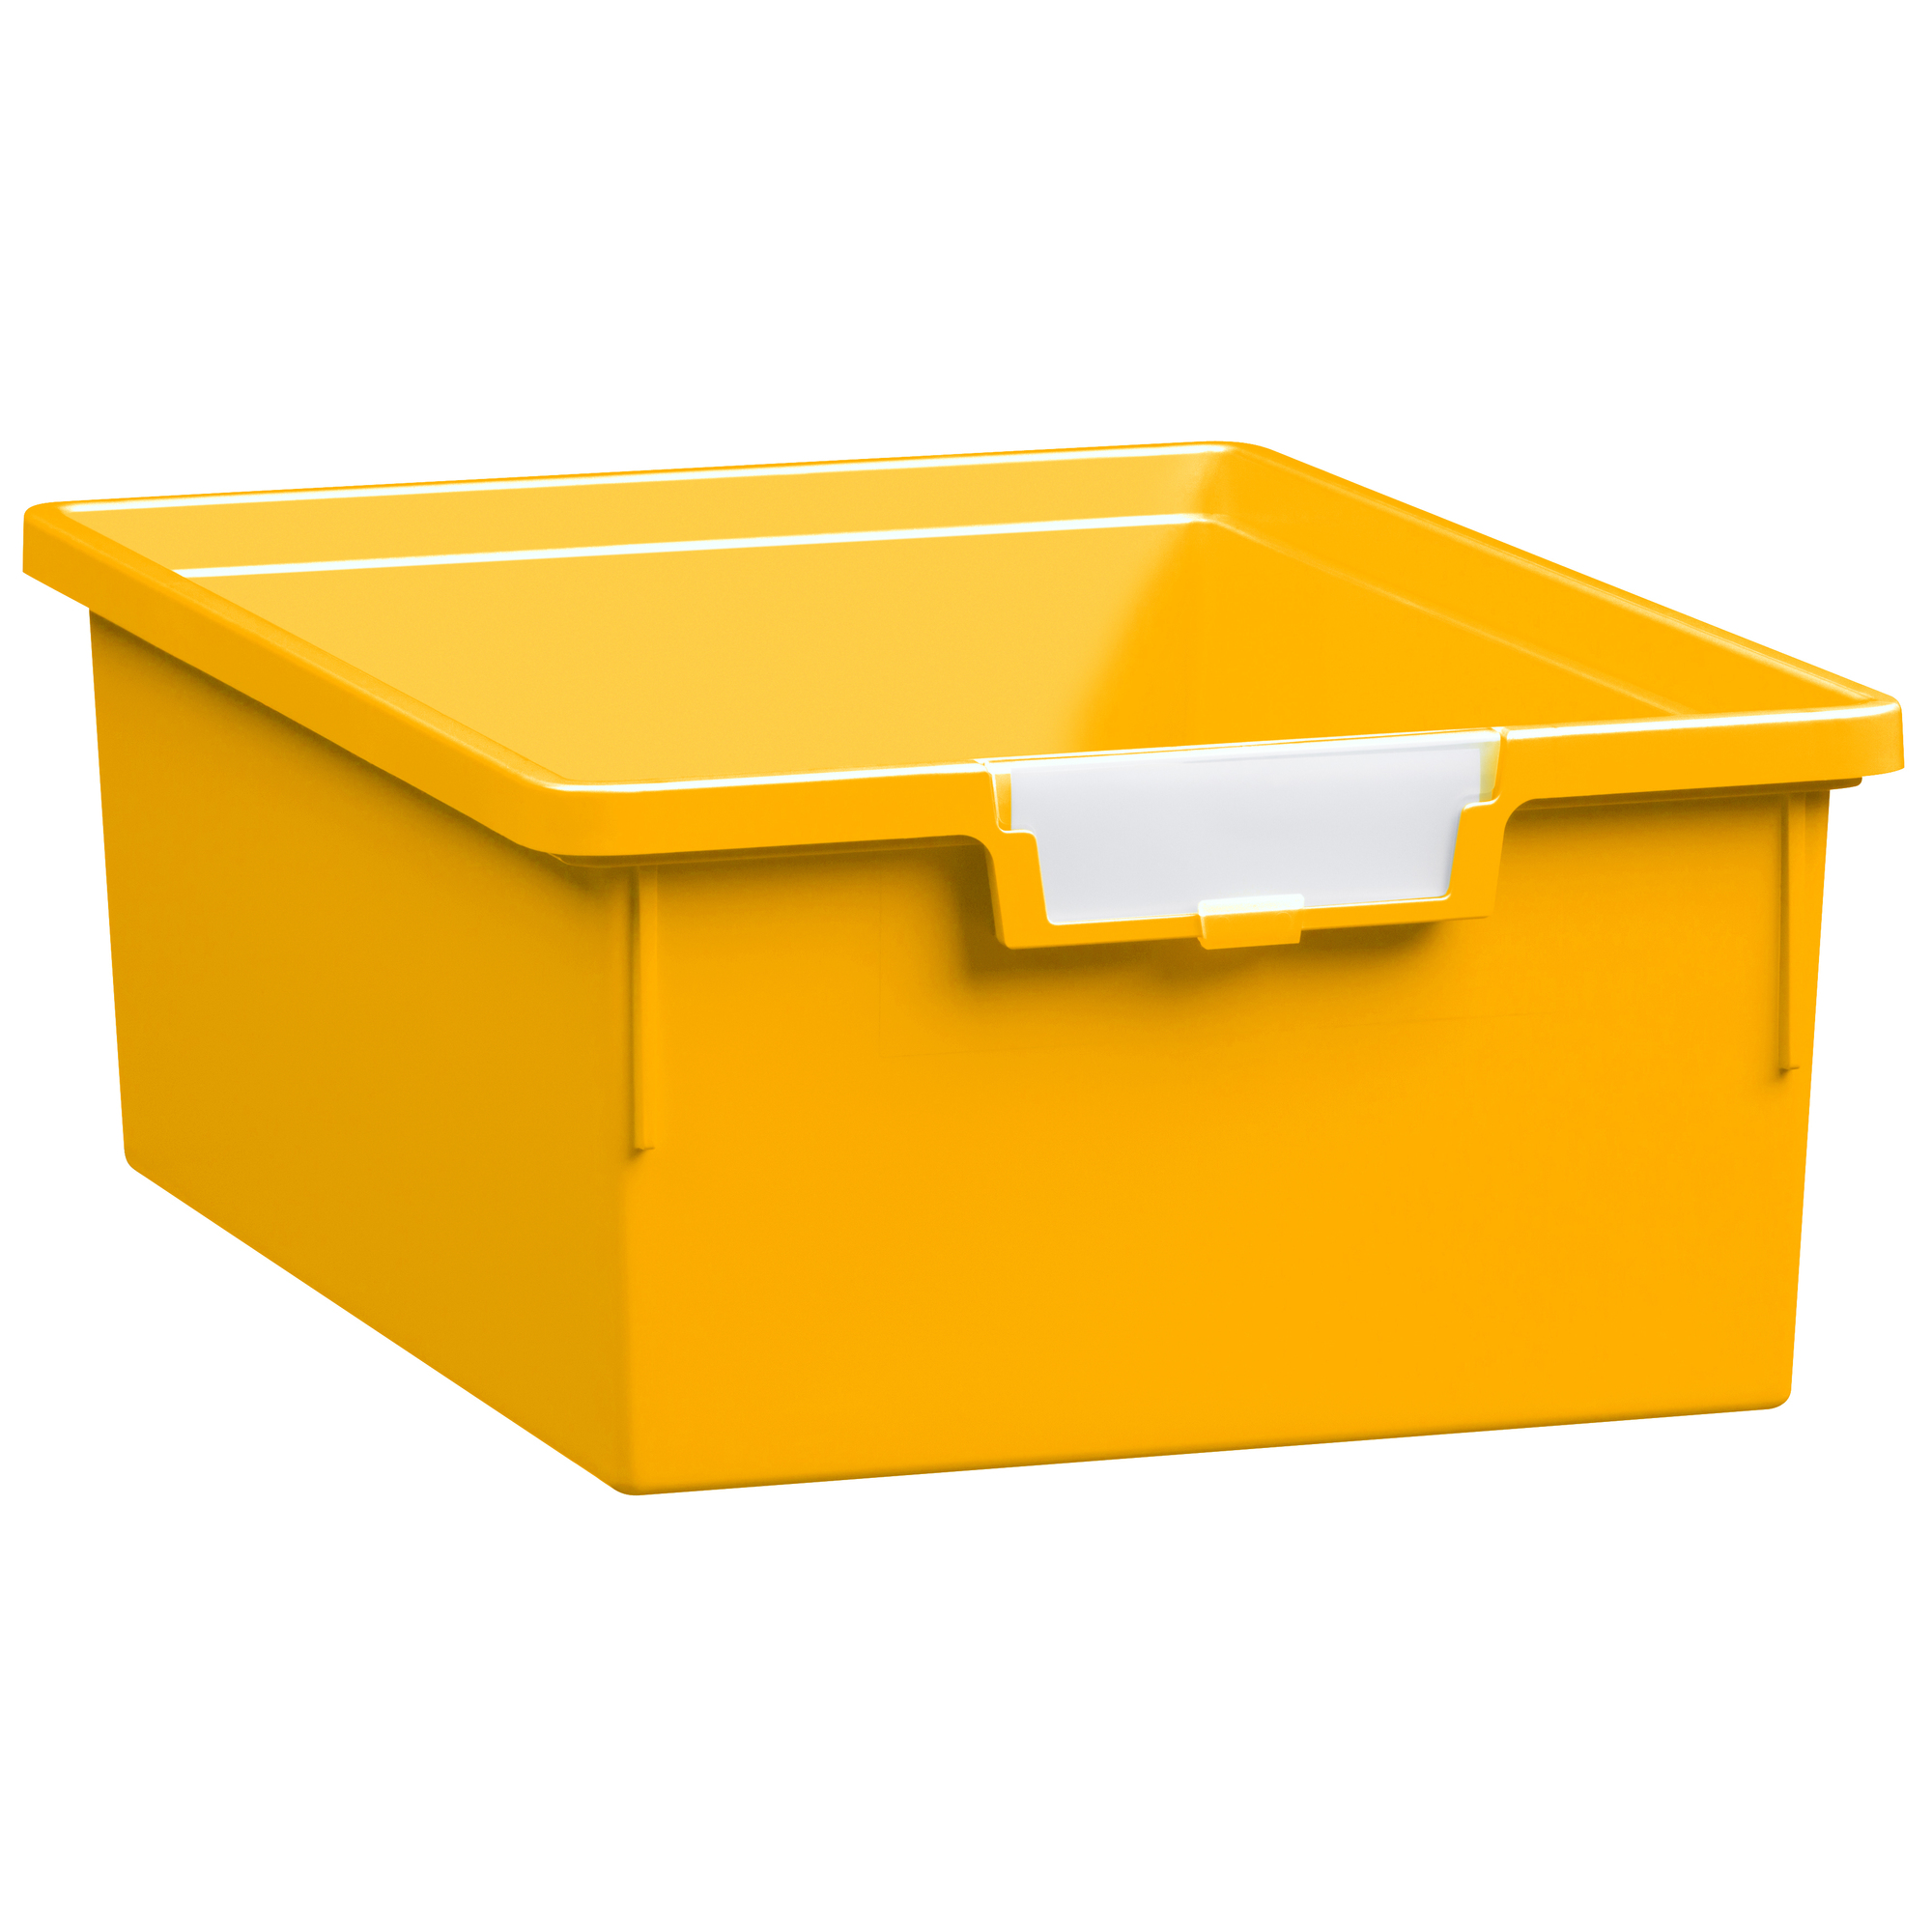 Certwood StorWerks, Slim Line 6Inch Tray in Primary Yellow-3PK, Included (qty.) 3 Height 6 in, Model CE1952PY3